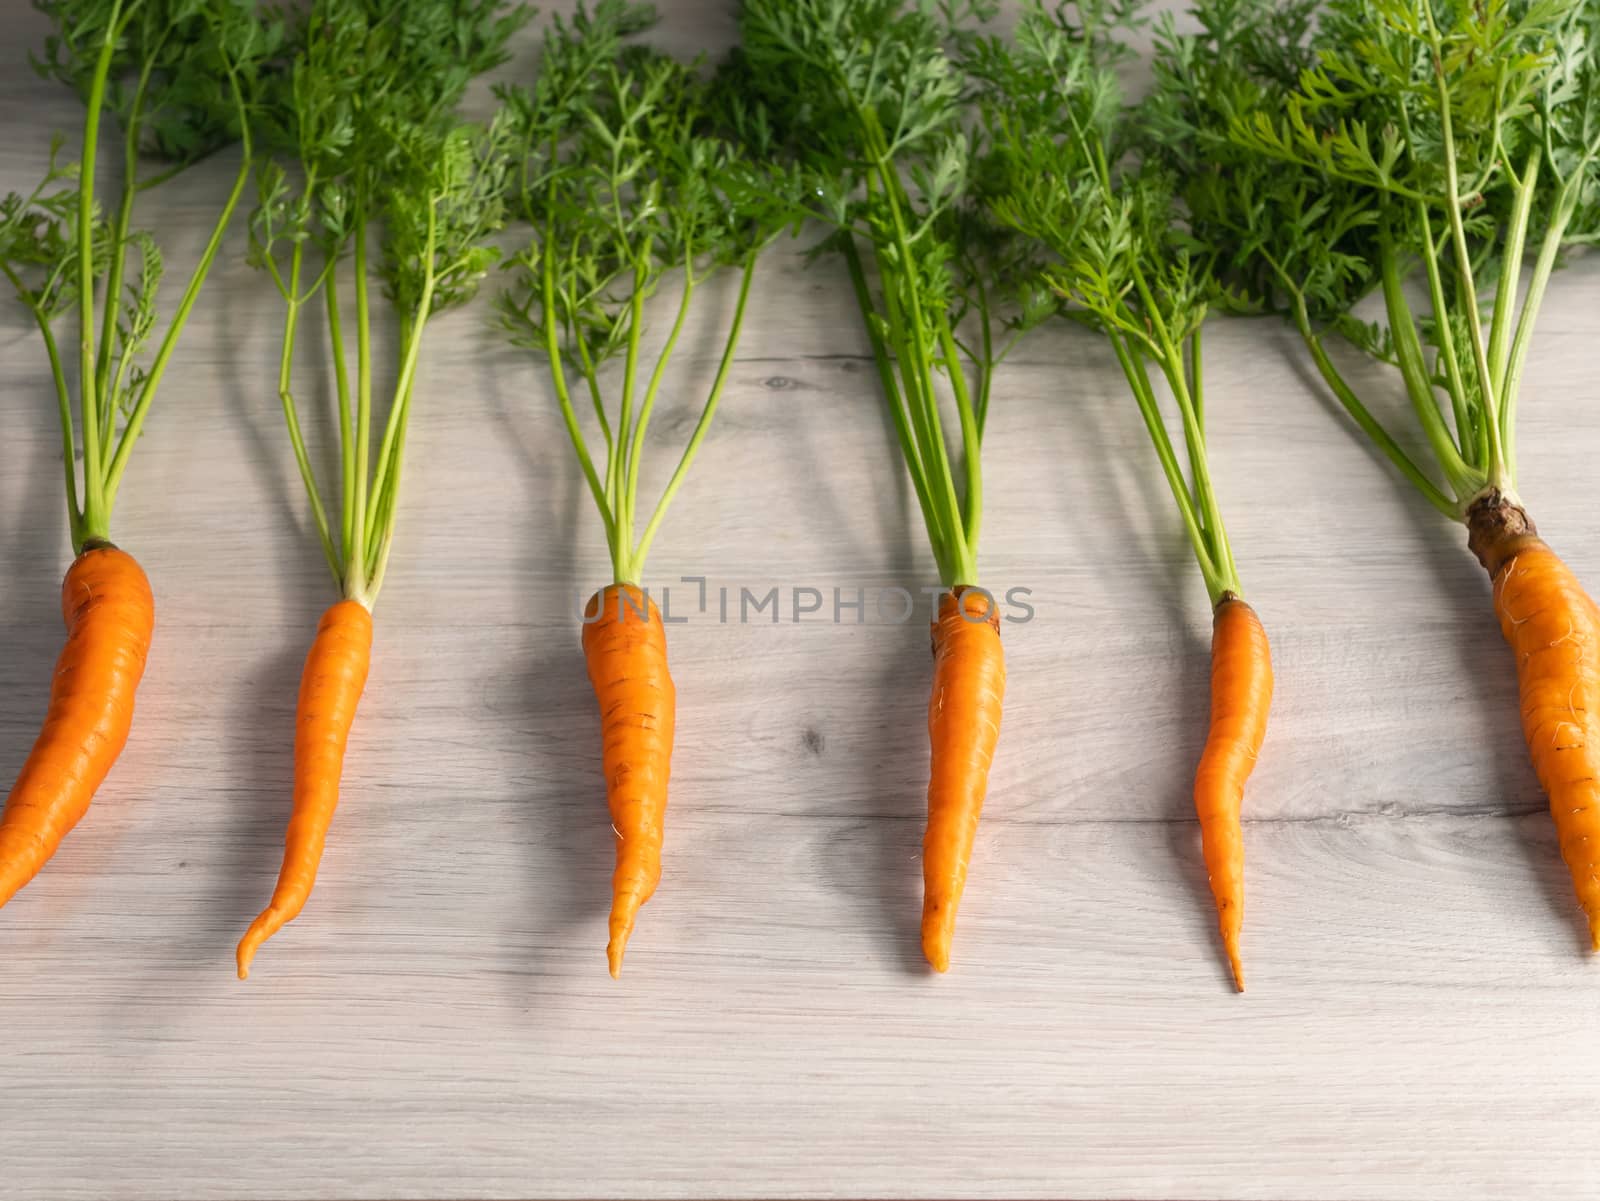 Fresh carrots only from the garden. Orange carrots with a green stem on a light background. Appetizing healthy vegetable by Try_my_best